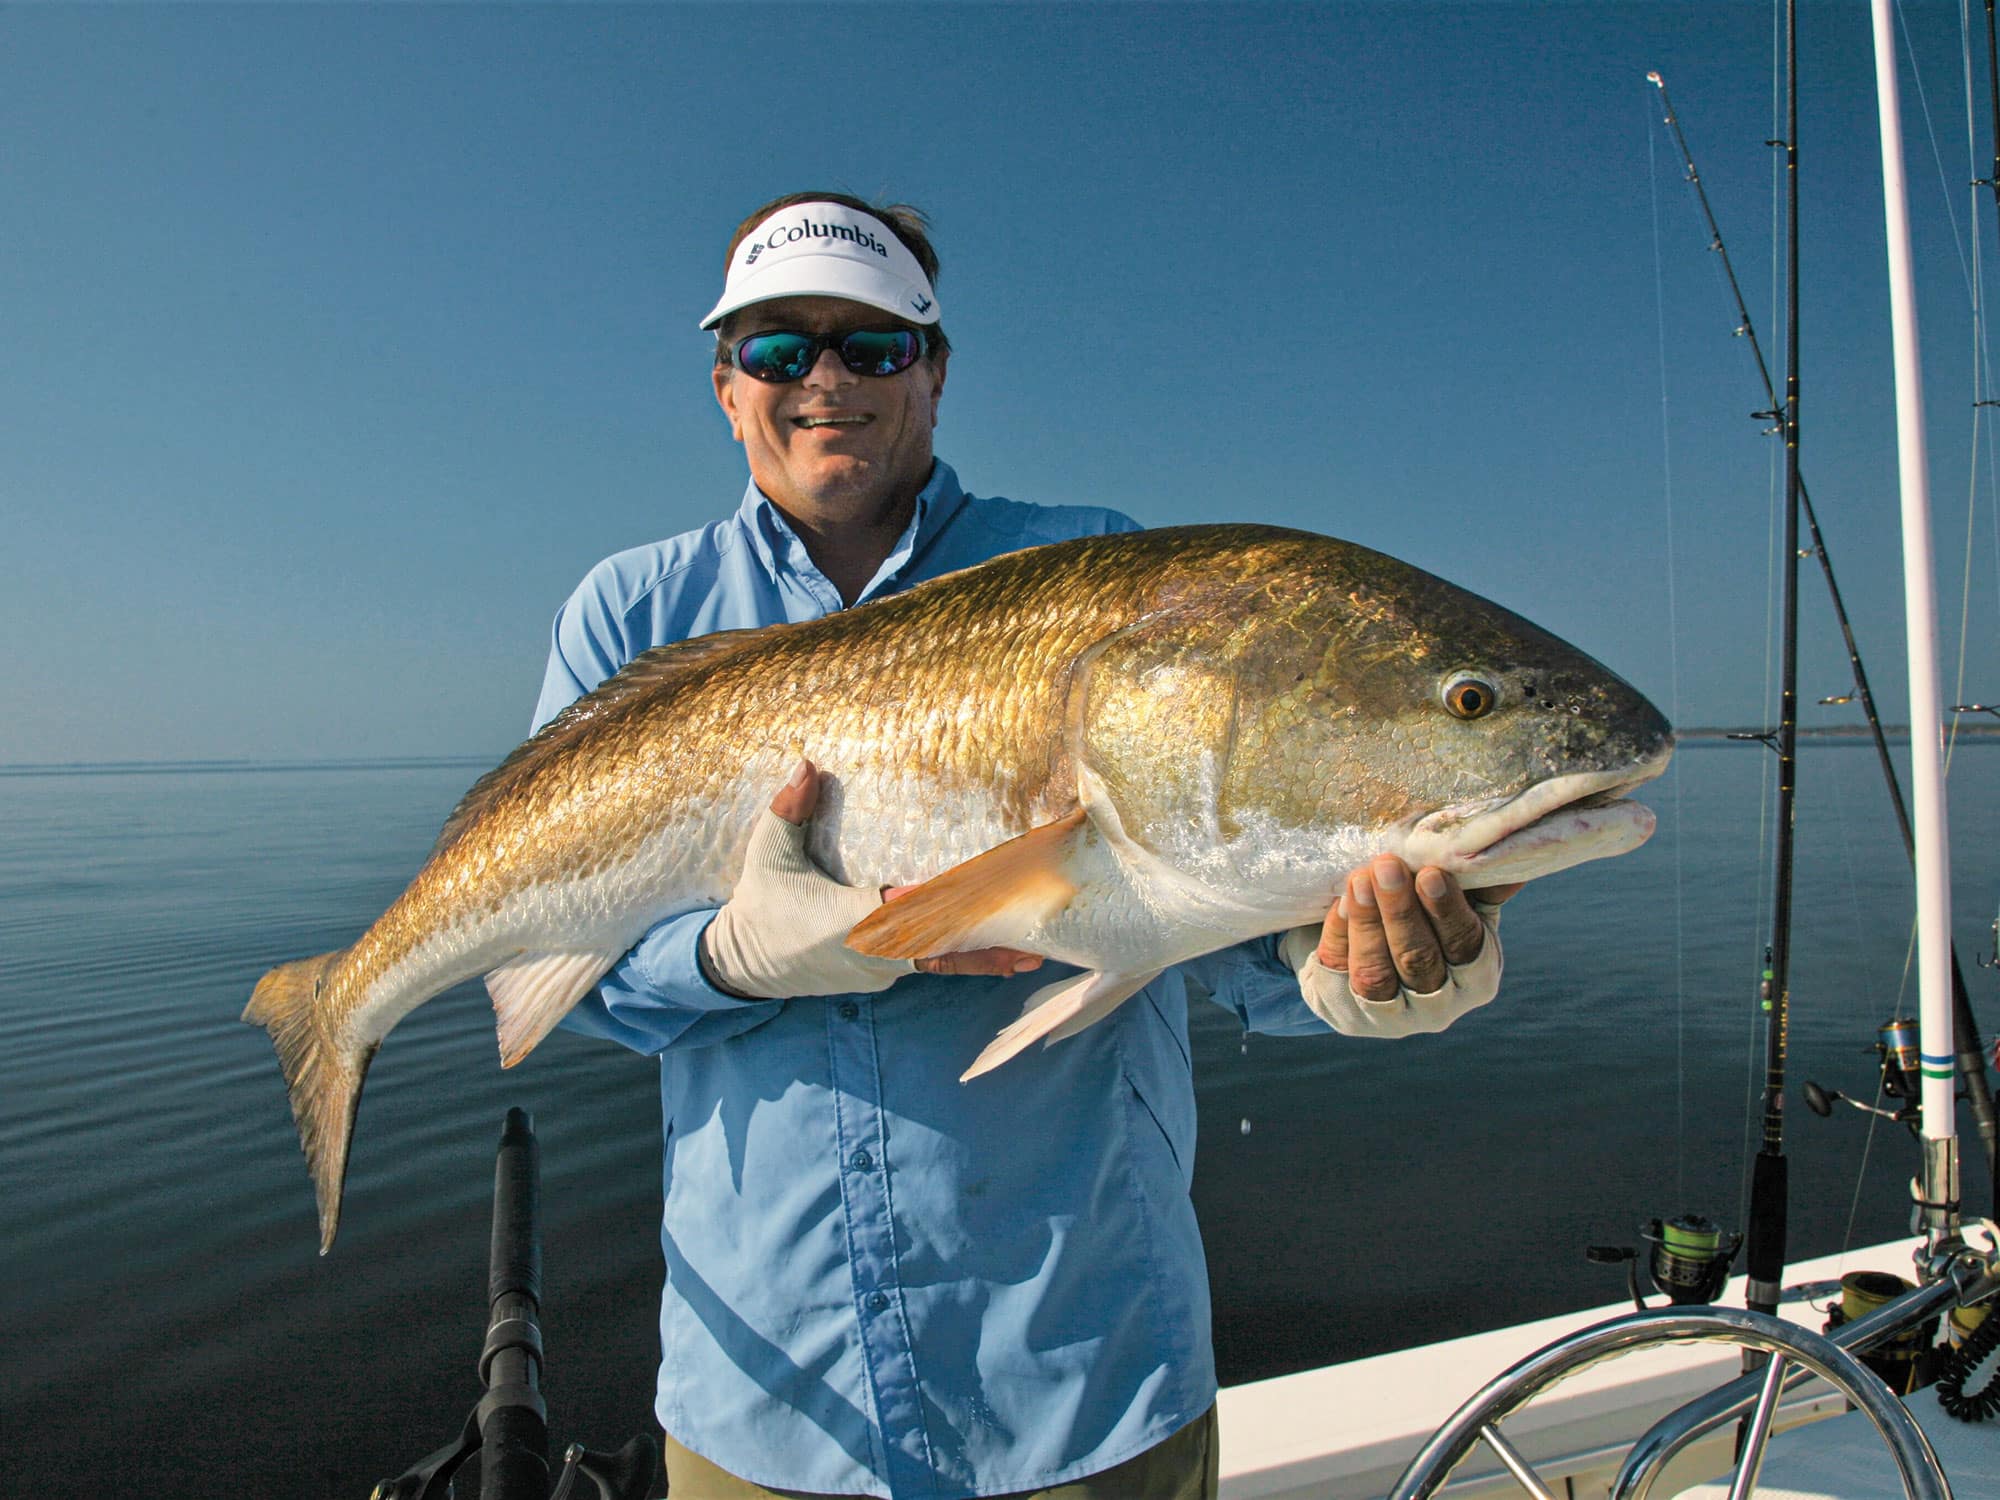 Dead bait can effective when going saltwater fishing